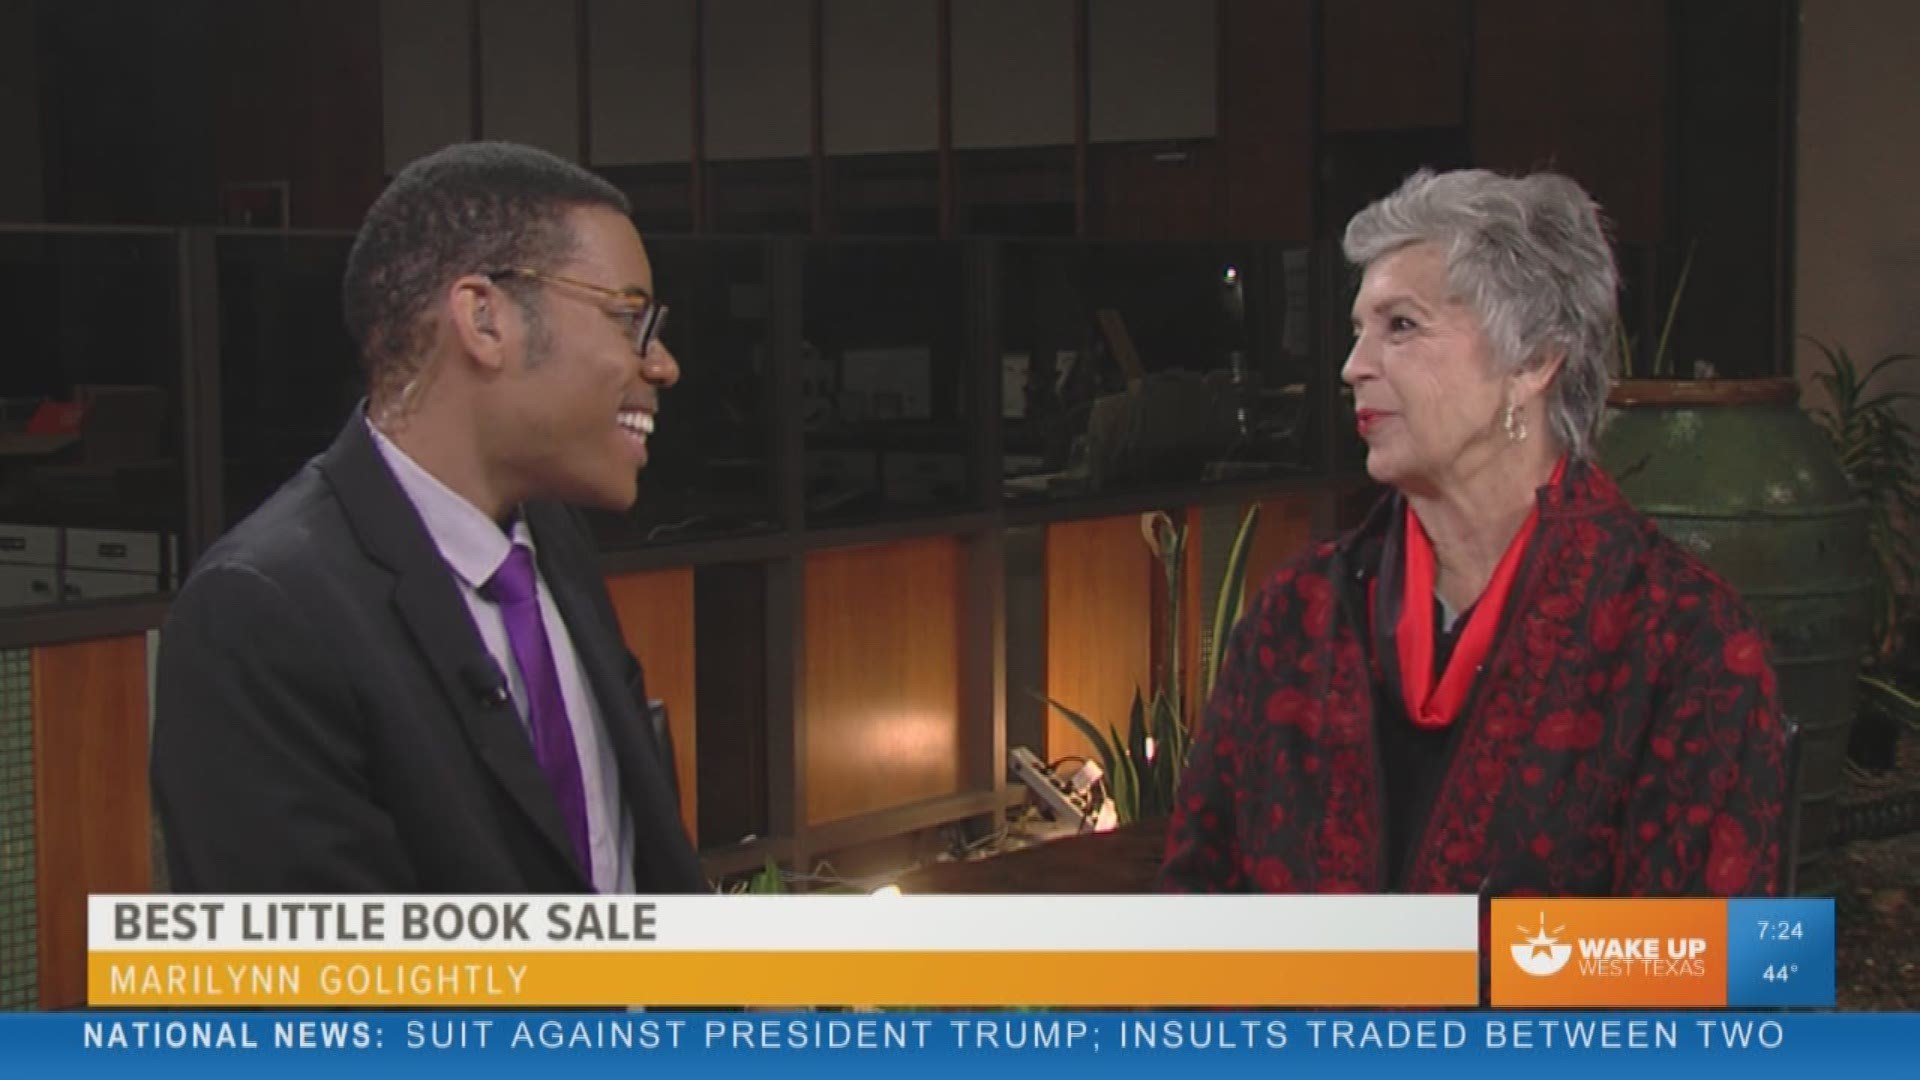 Our Malik Mingo speaks with the Adult Literacy Council about their upcoming book sale that is sure to the "best."